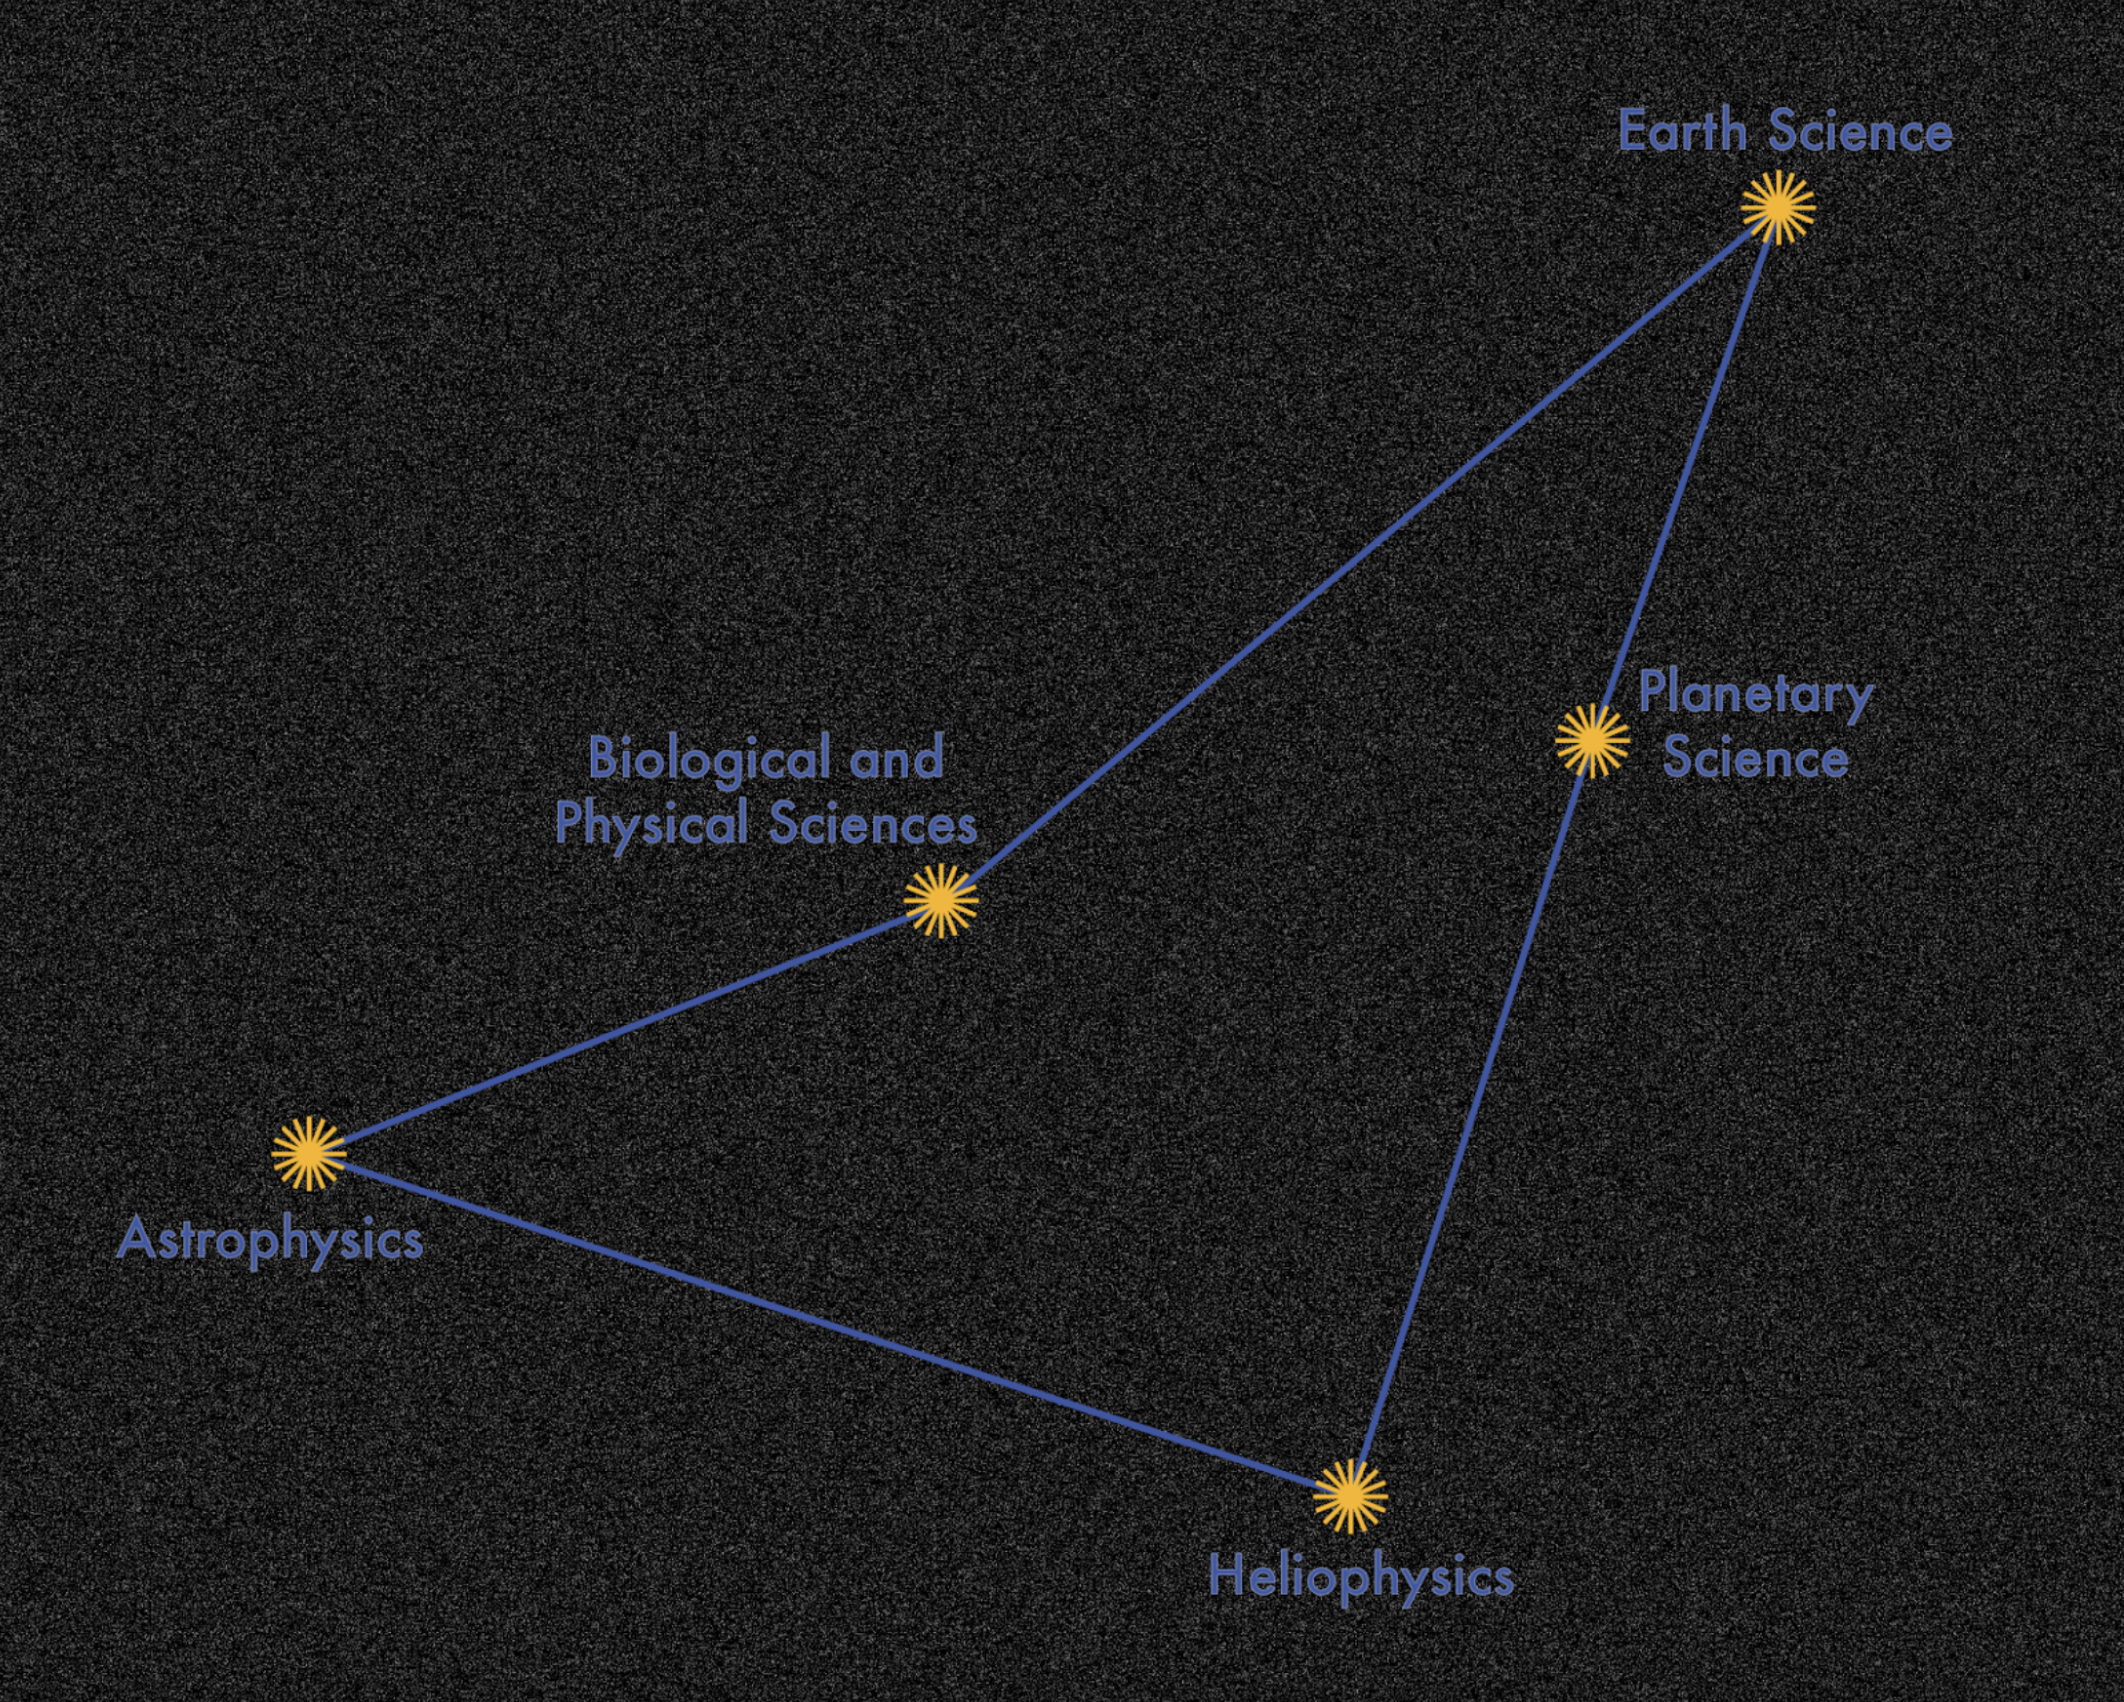 Five orange stars connected in a V-like shape with blue lines, like a diagram of the constellation of Indus. Each of the stars is labeled with one of the NASA Science Mission Directorate divisions: astrophysics, Earth science, heliophysics, planetary science, and biological and physical sciences.